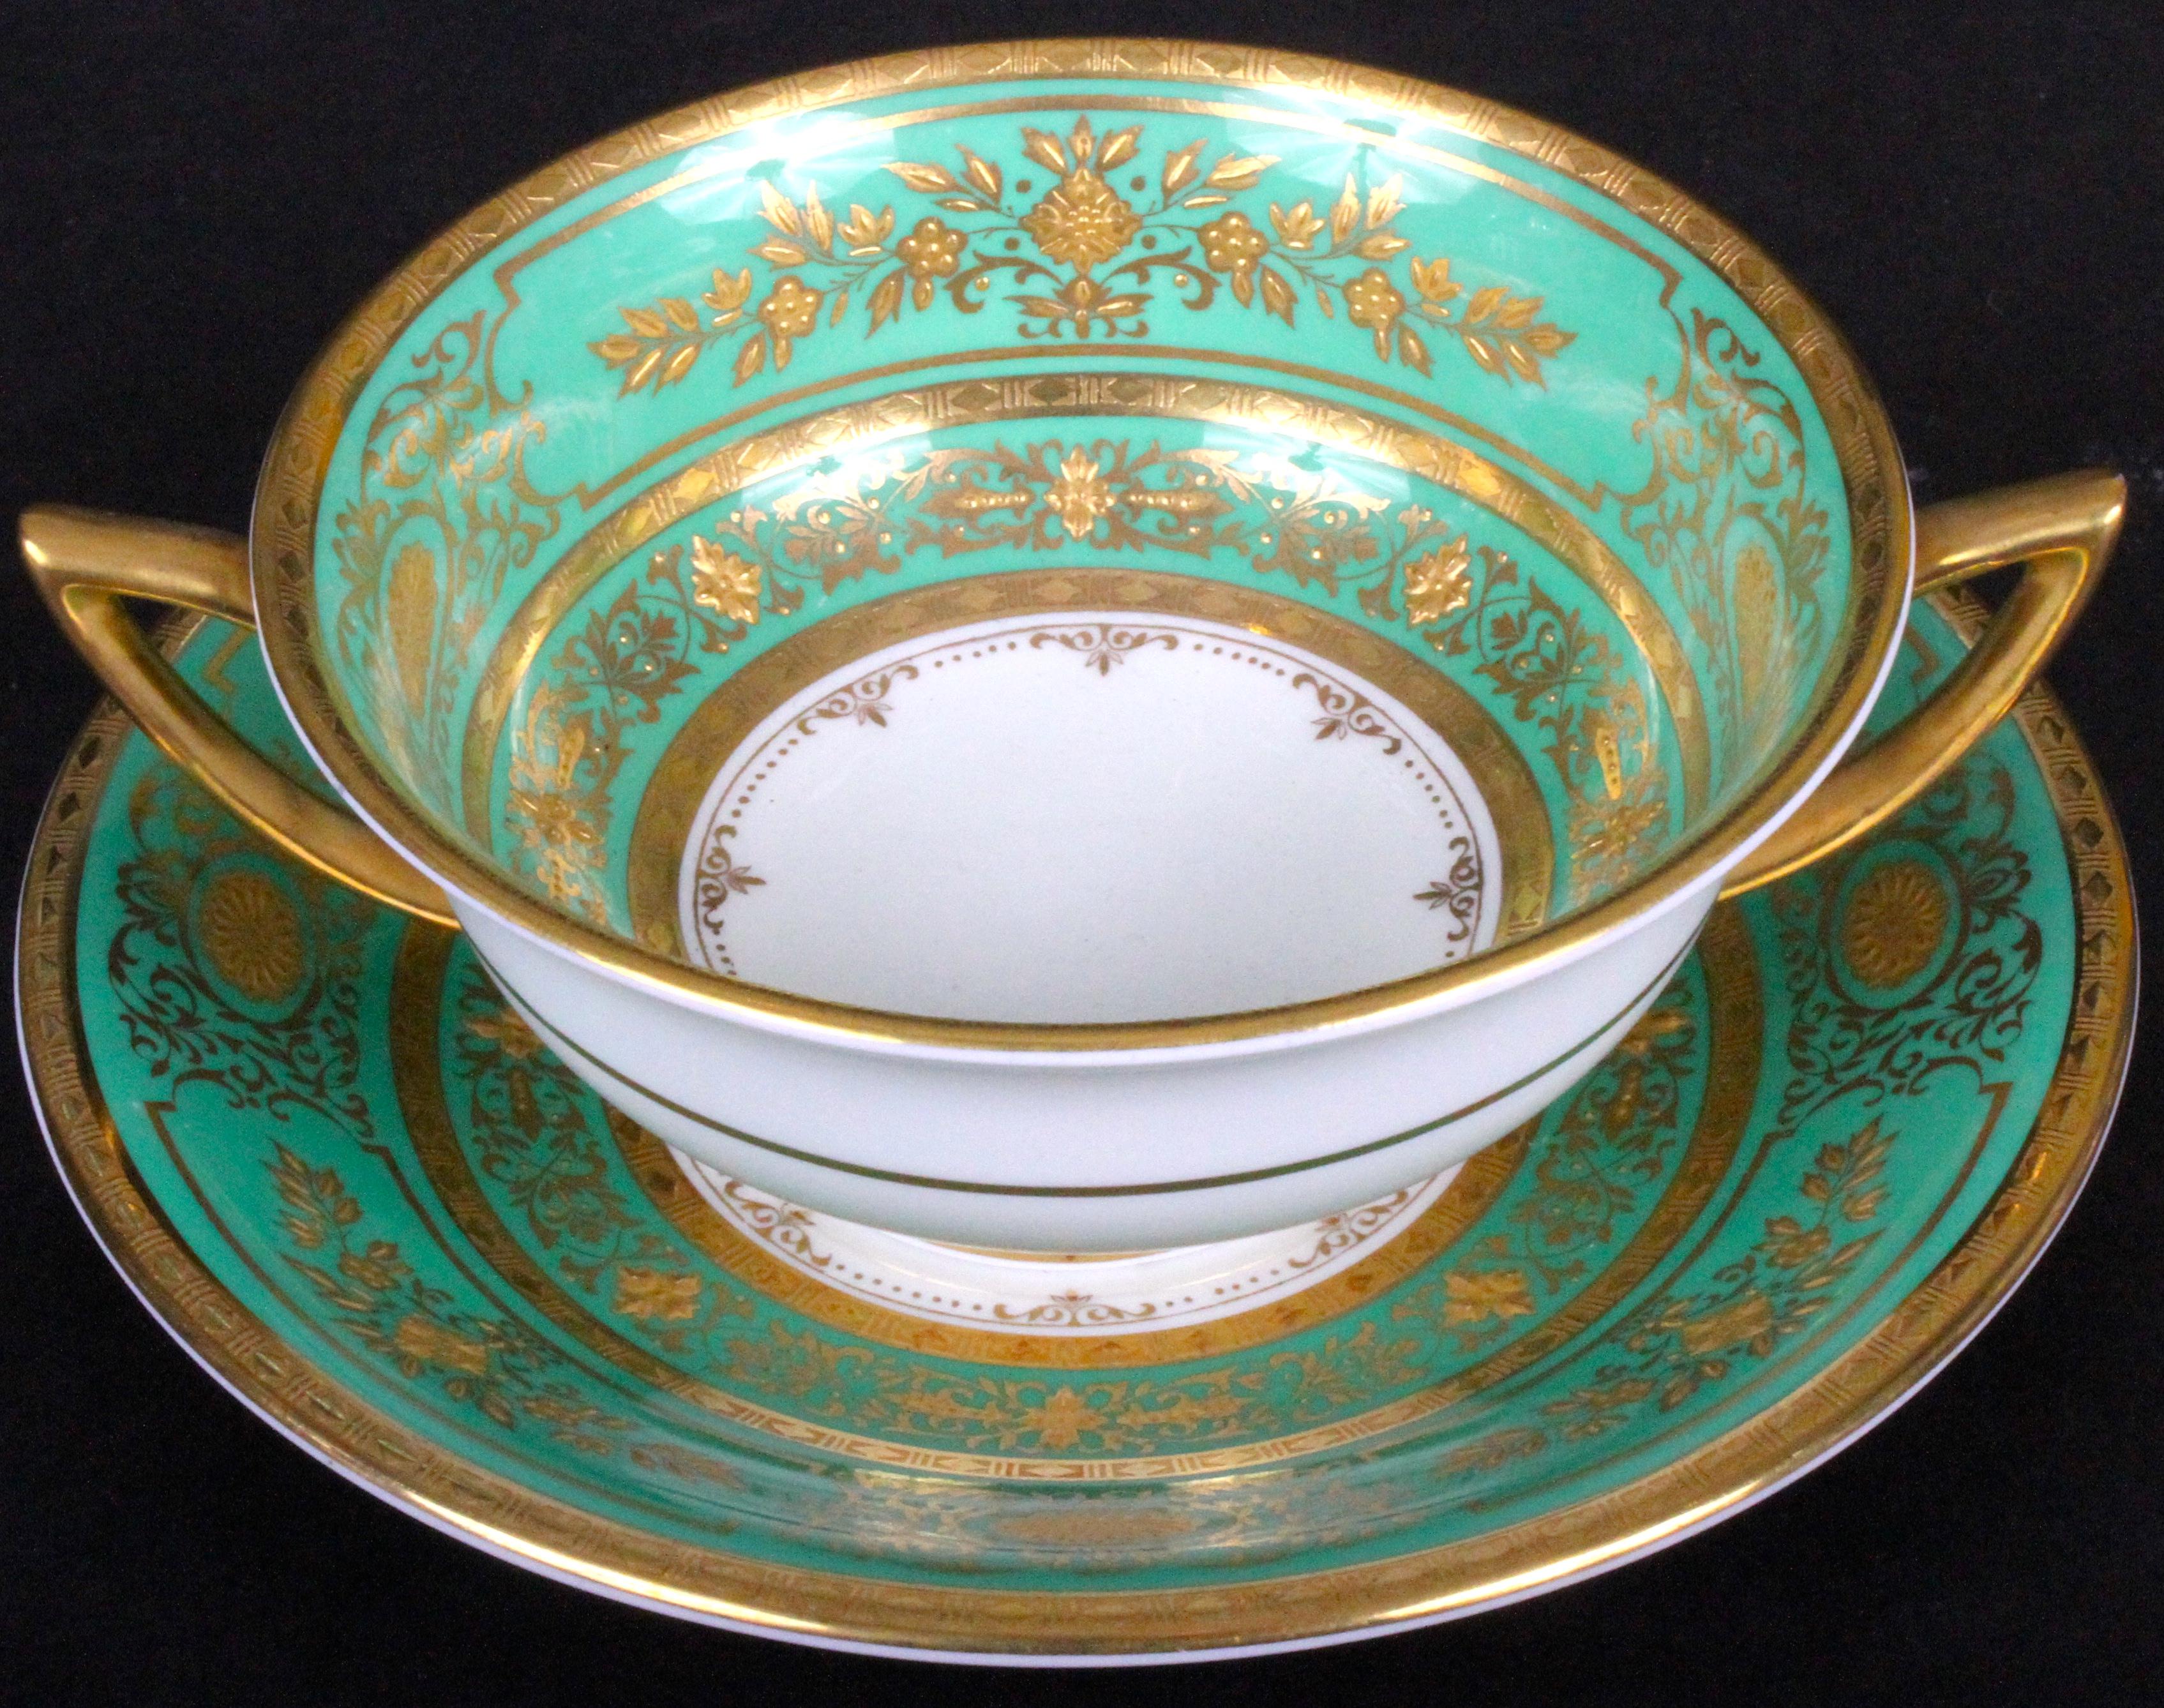 Gold Leaf Service for 18 of Minton for Tiffany, Green and Gold For Sale